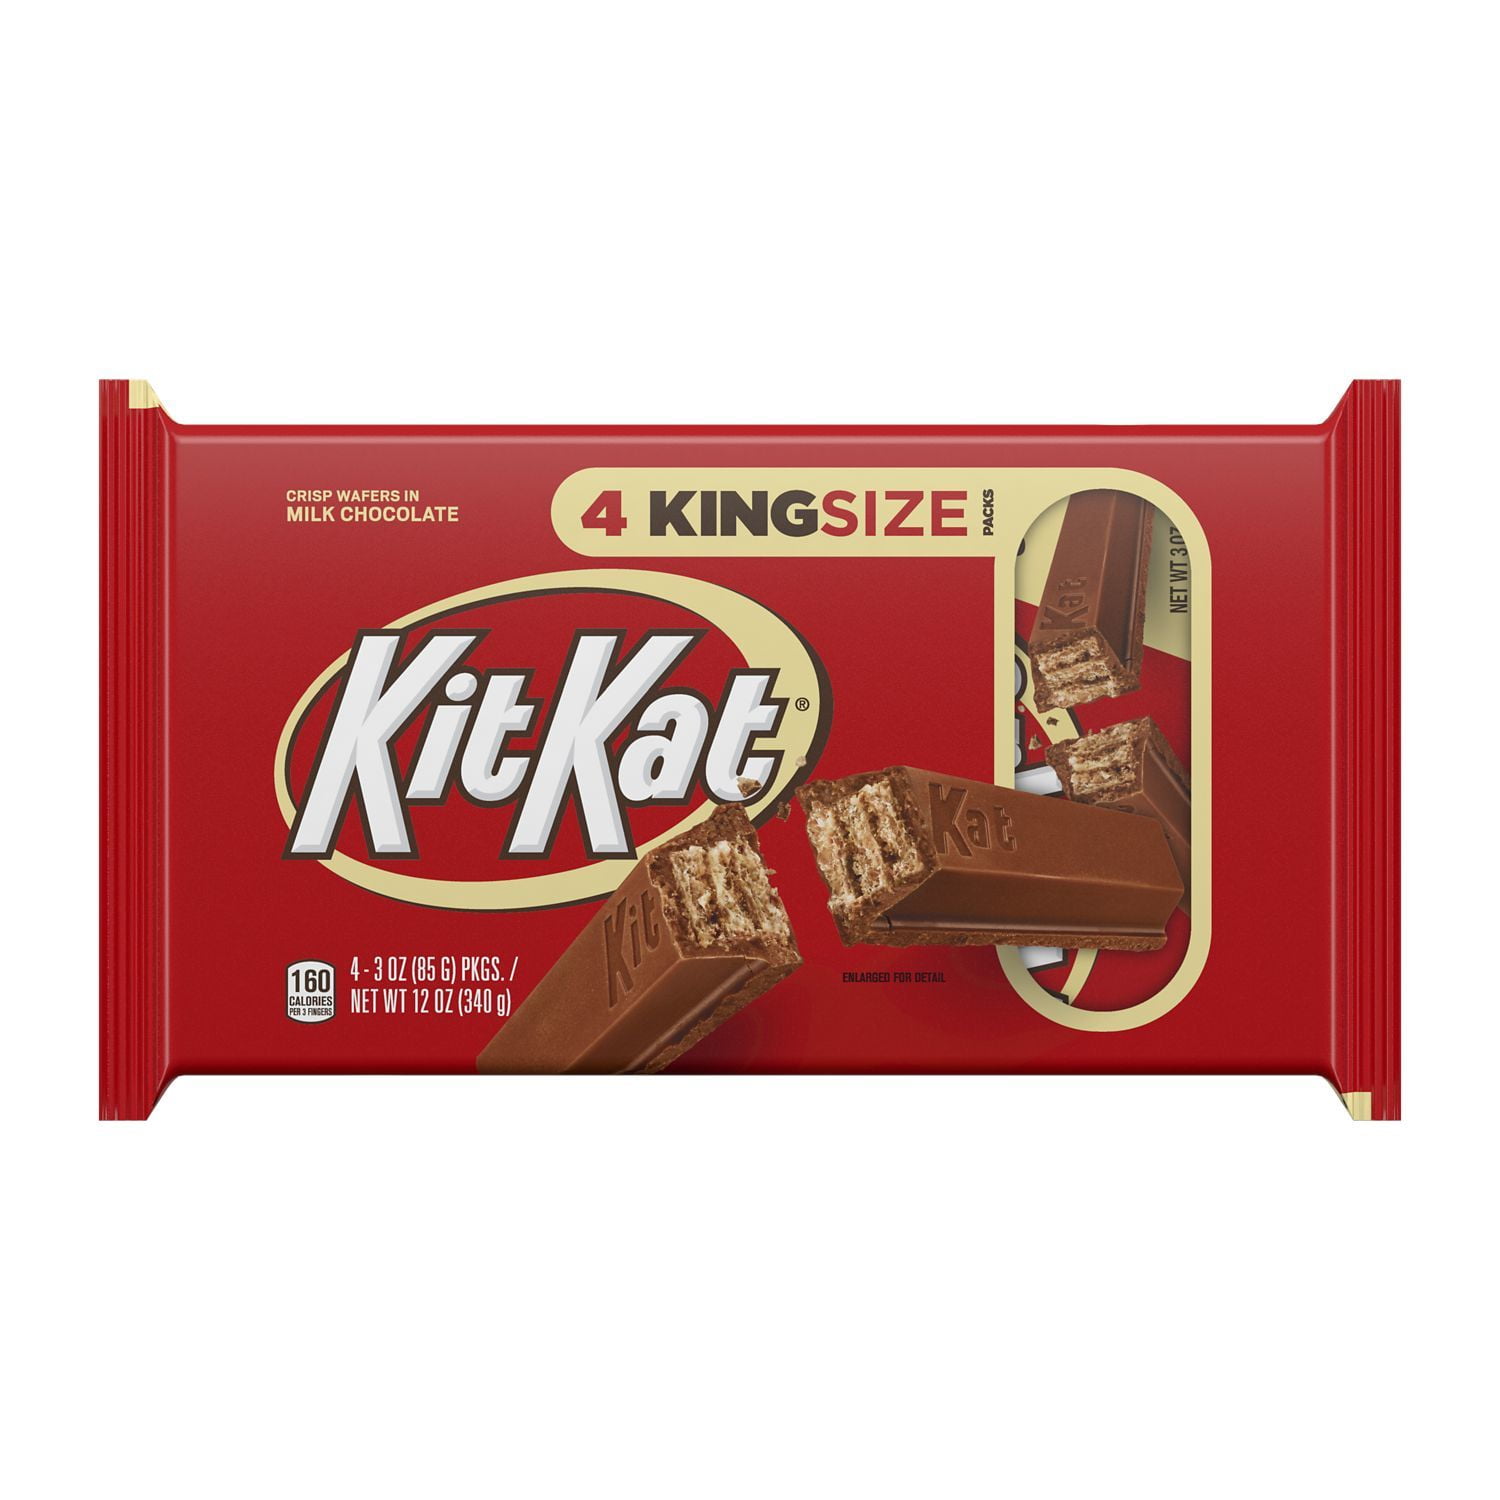 KIT KAT, Milk Chocolate King Size Wafer Candy, Individually Wrapped, 3 oz, Bars (4 Count)